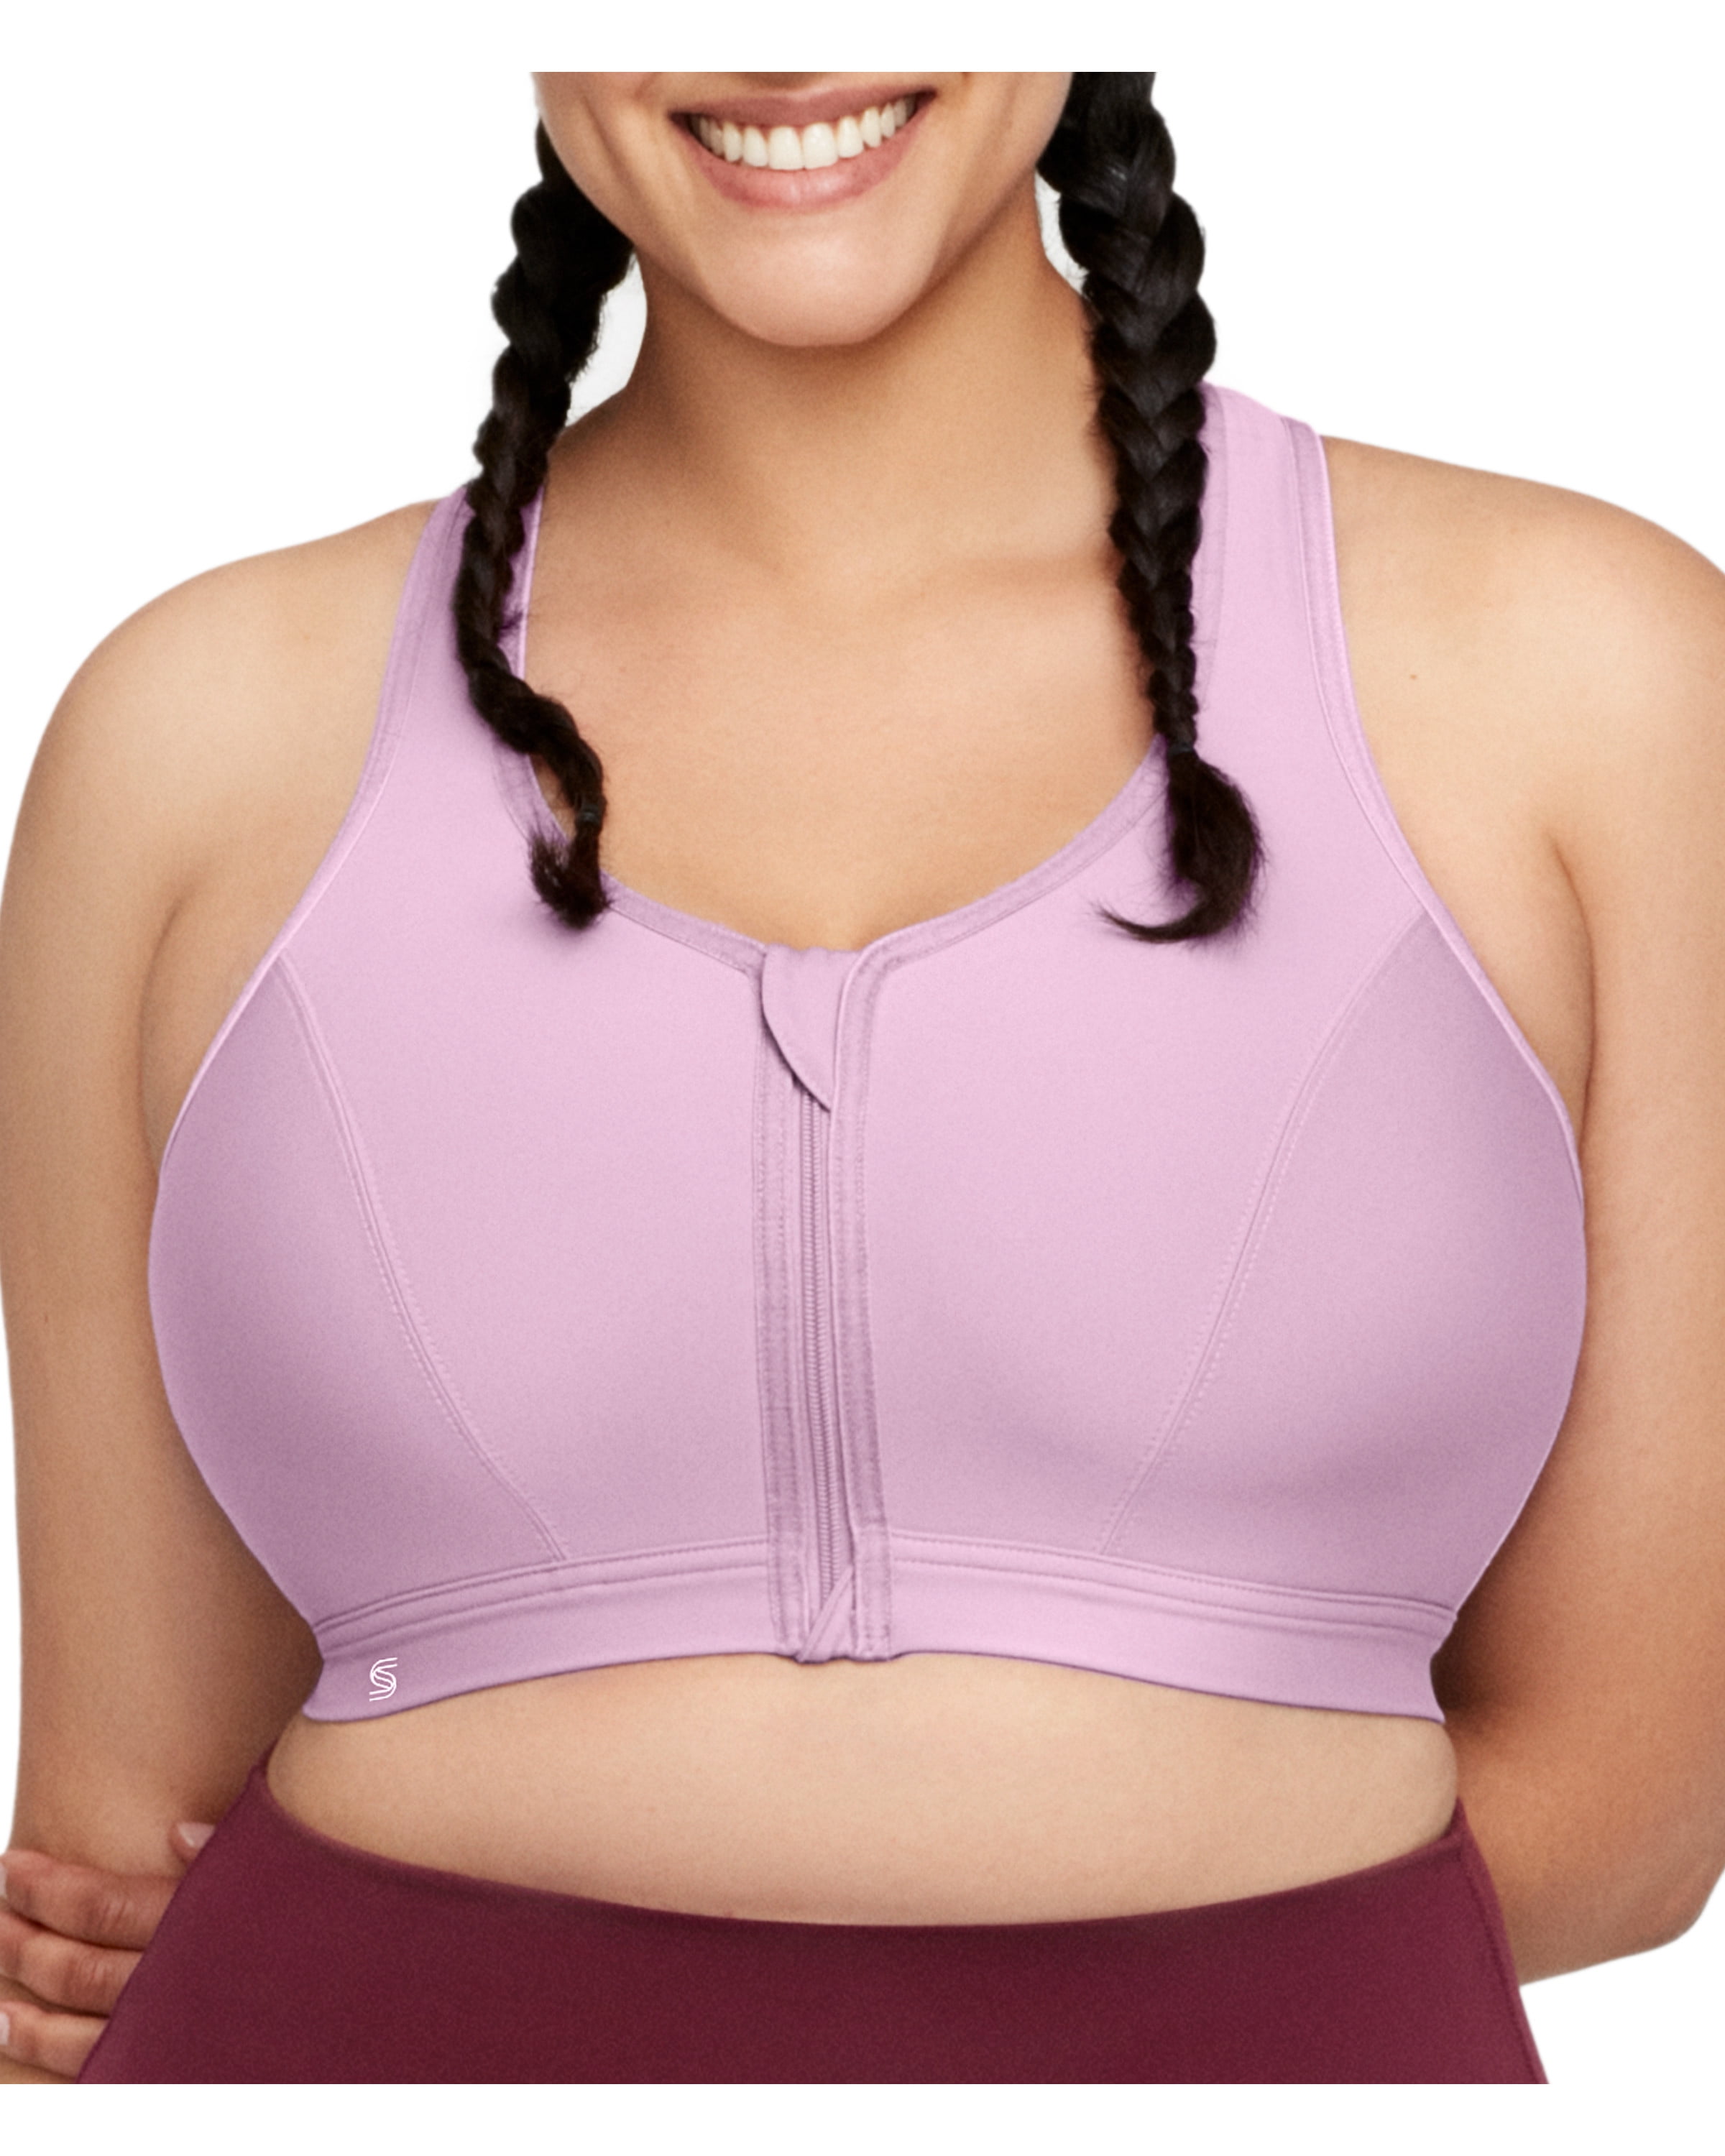 EHTMSAK Bras for Women No Underwire Front Closure Shapewear Plunge Sports  Bras for Women Plus Size Wireless Bras with Support and Lift Padded Plus  Size Wireless Bras with Padding Complexion 50F 